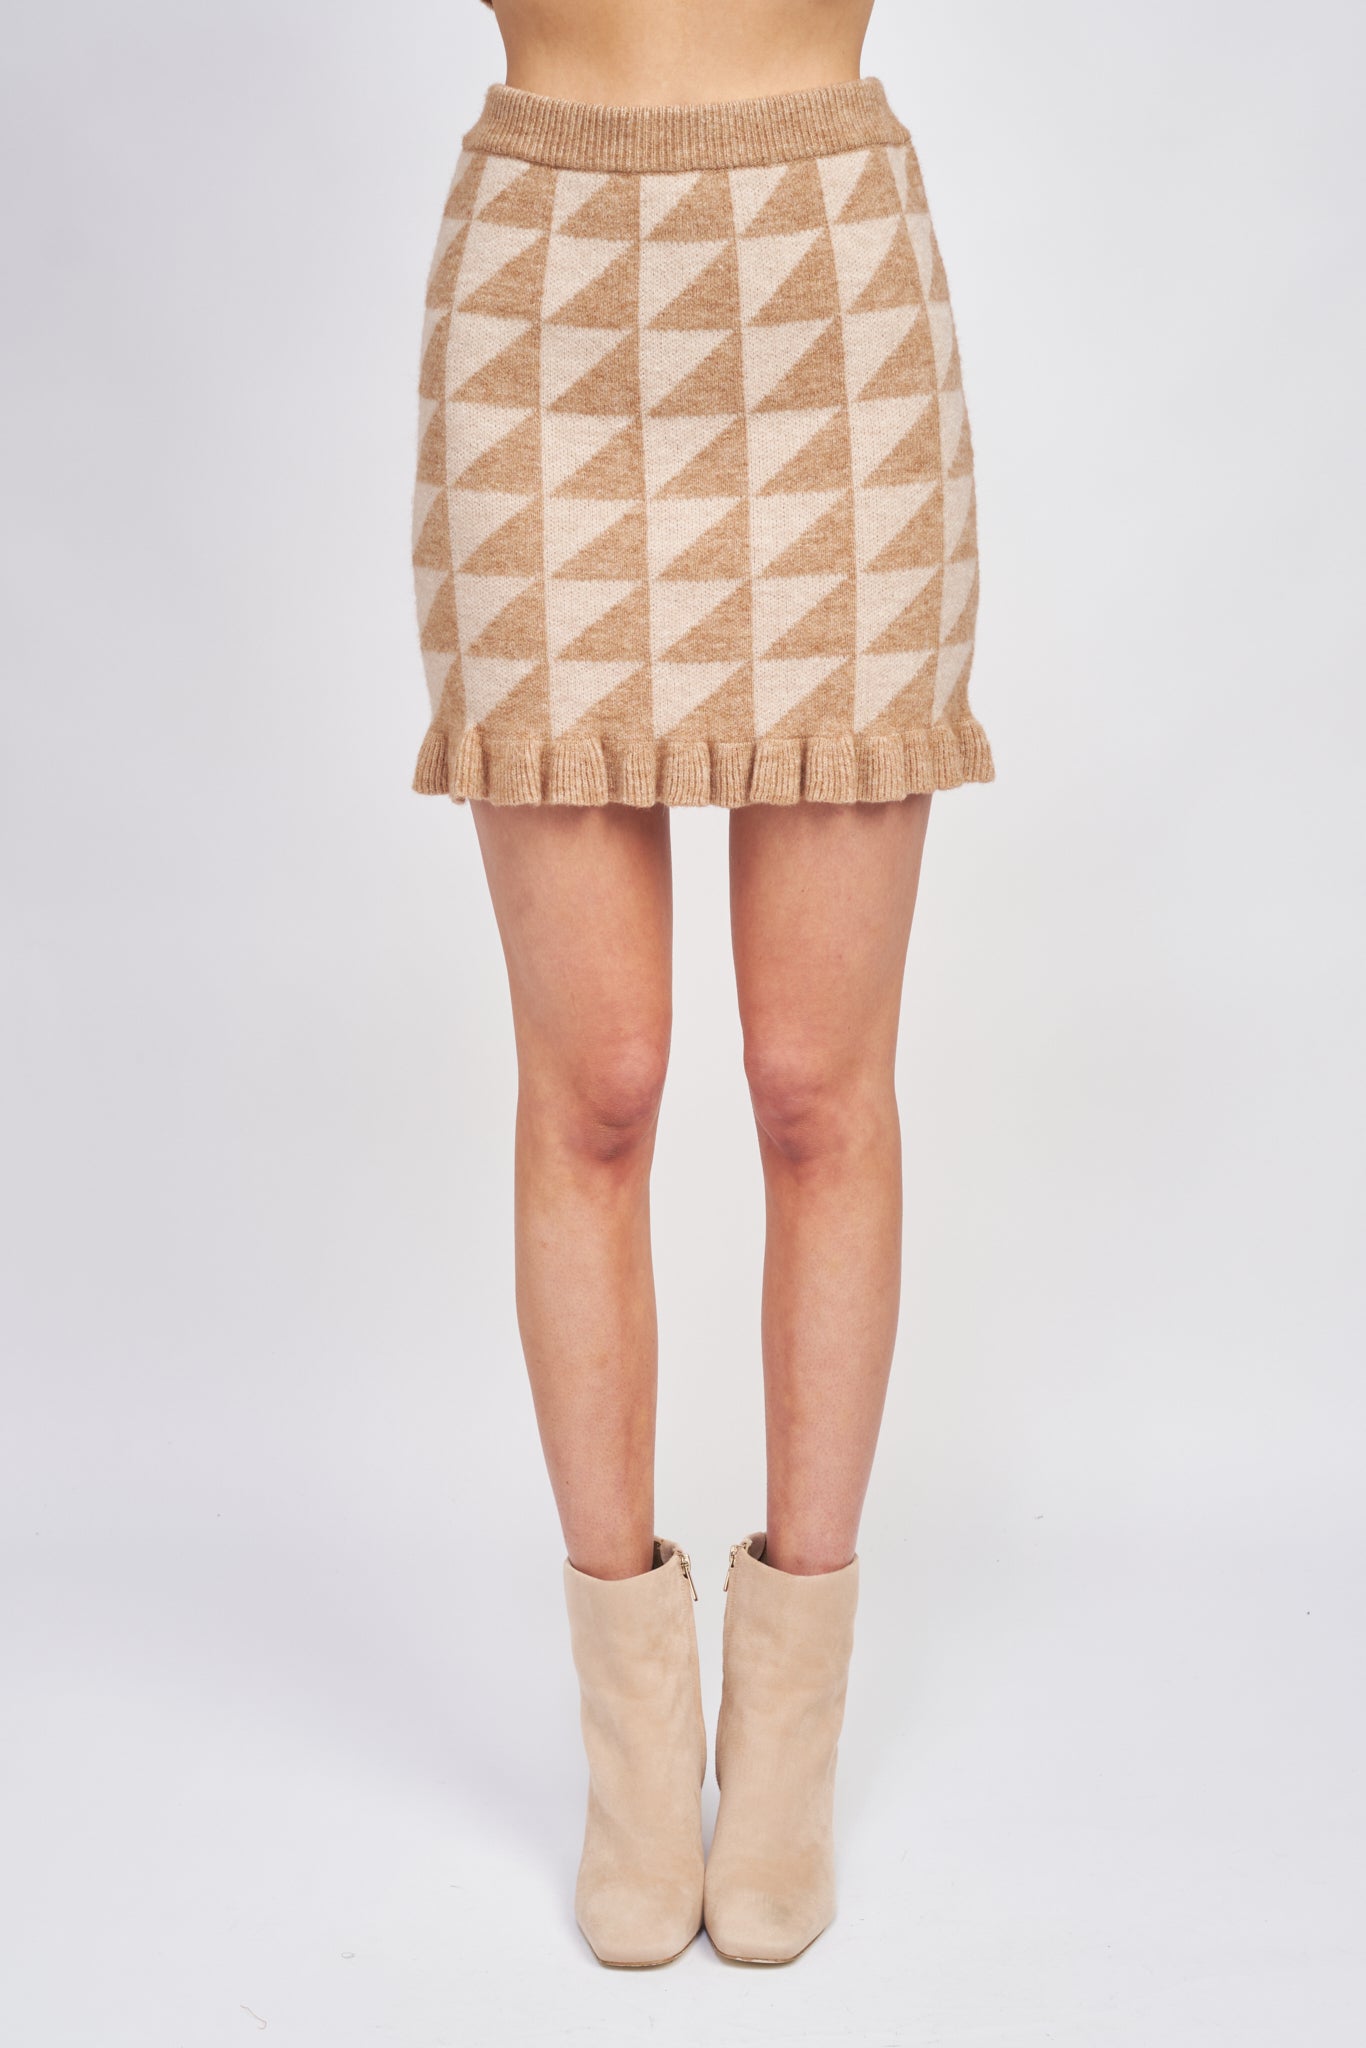 Blaise Mini Skirt in Taupe